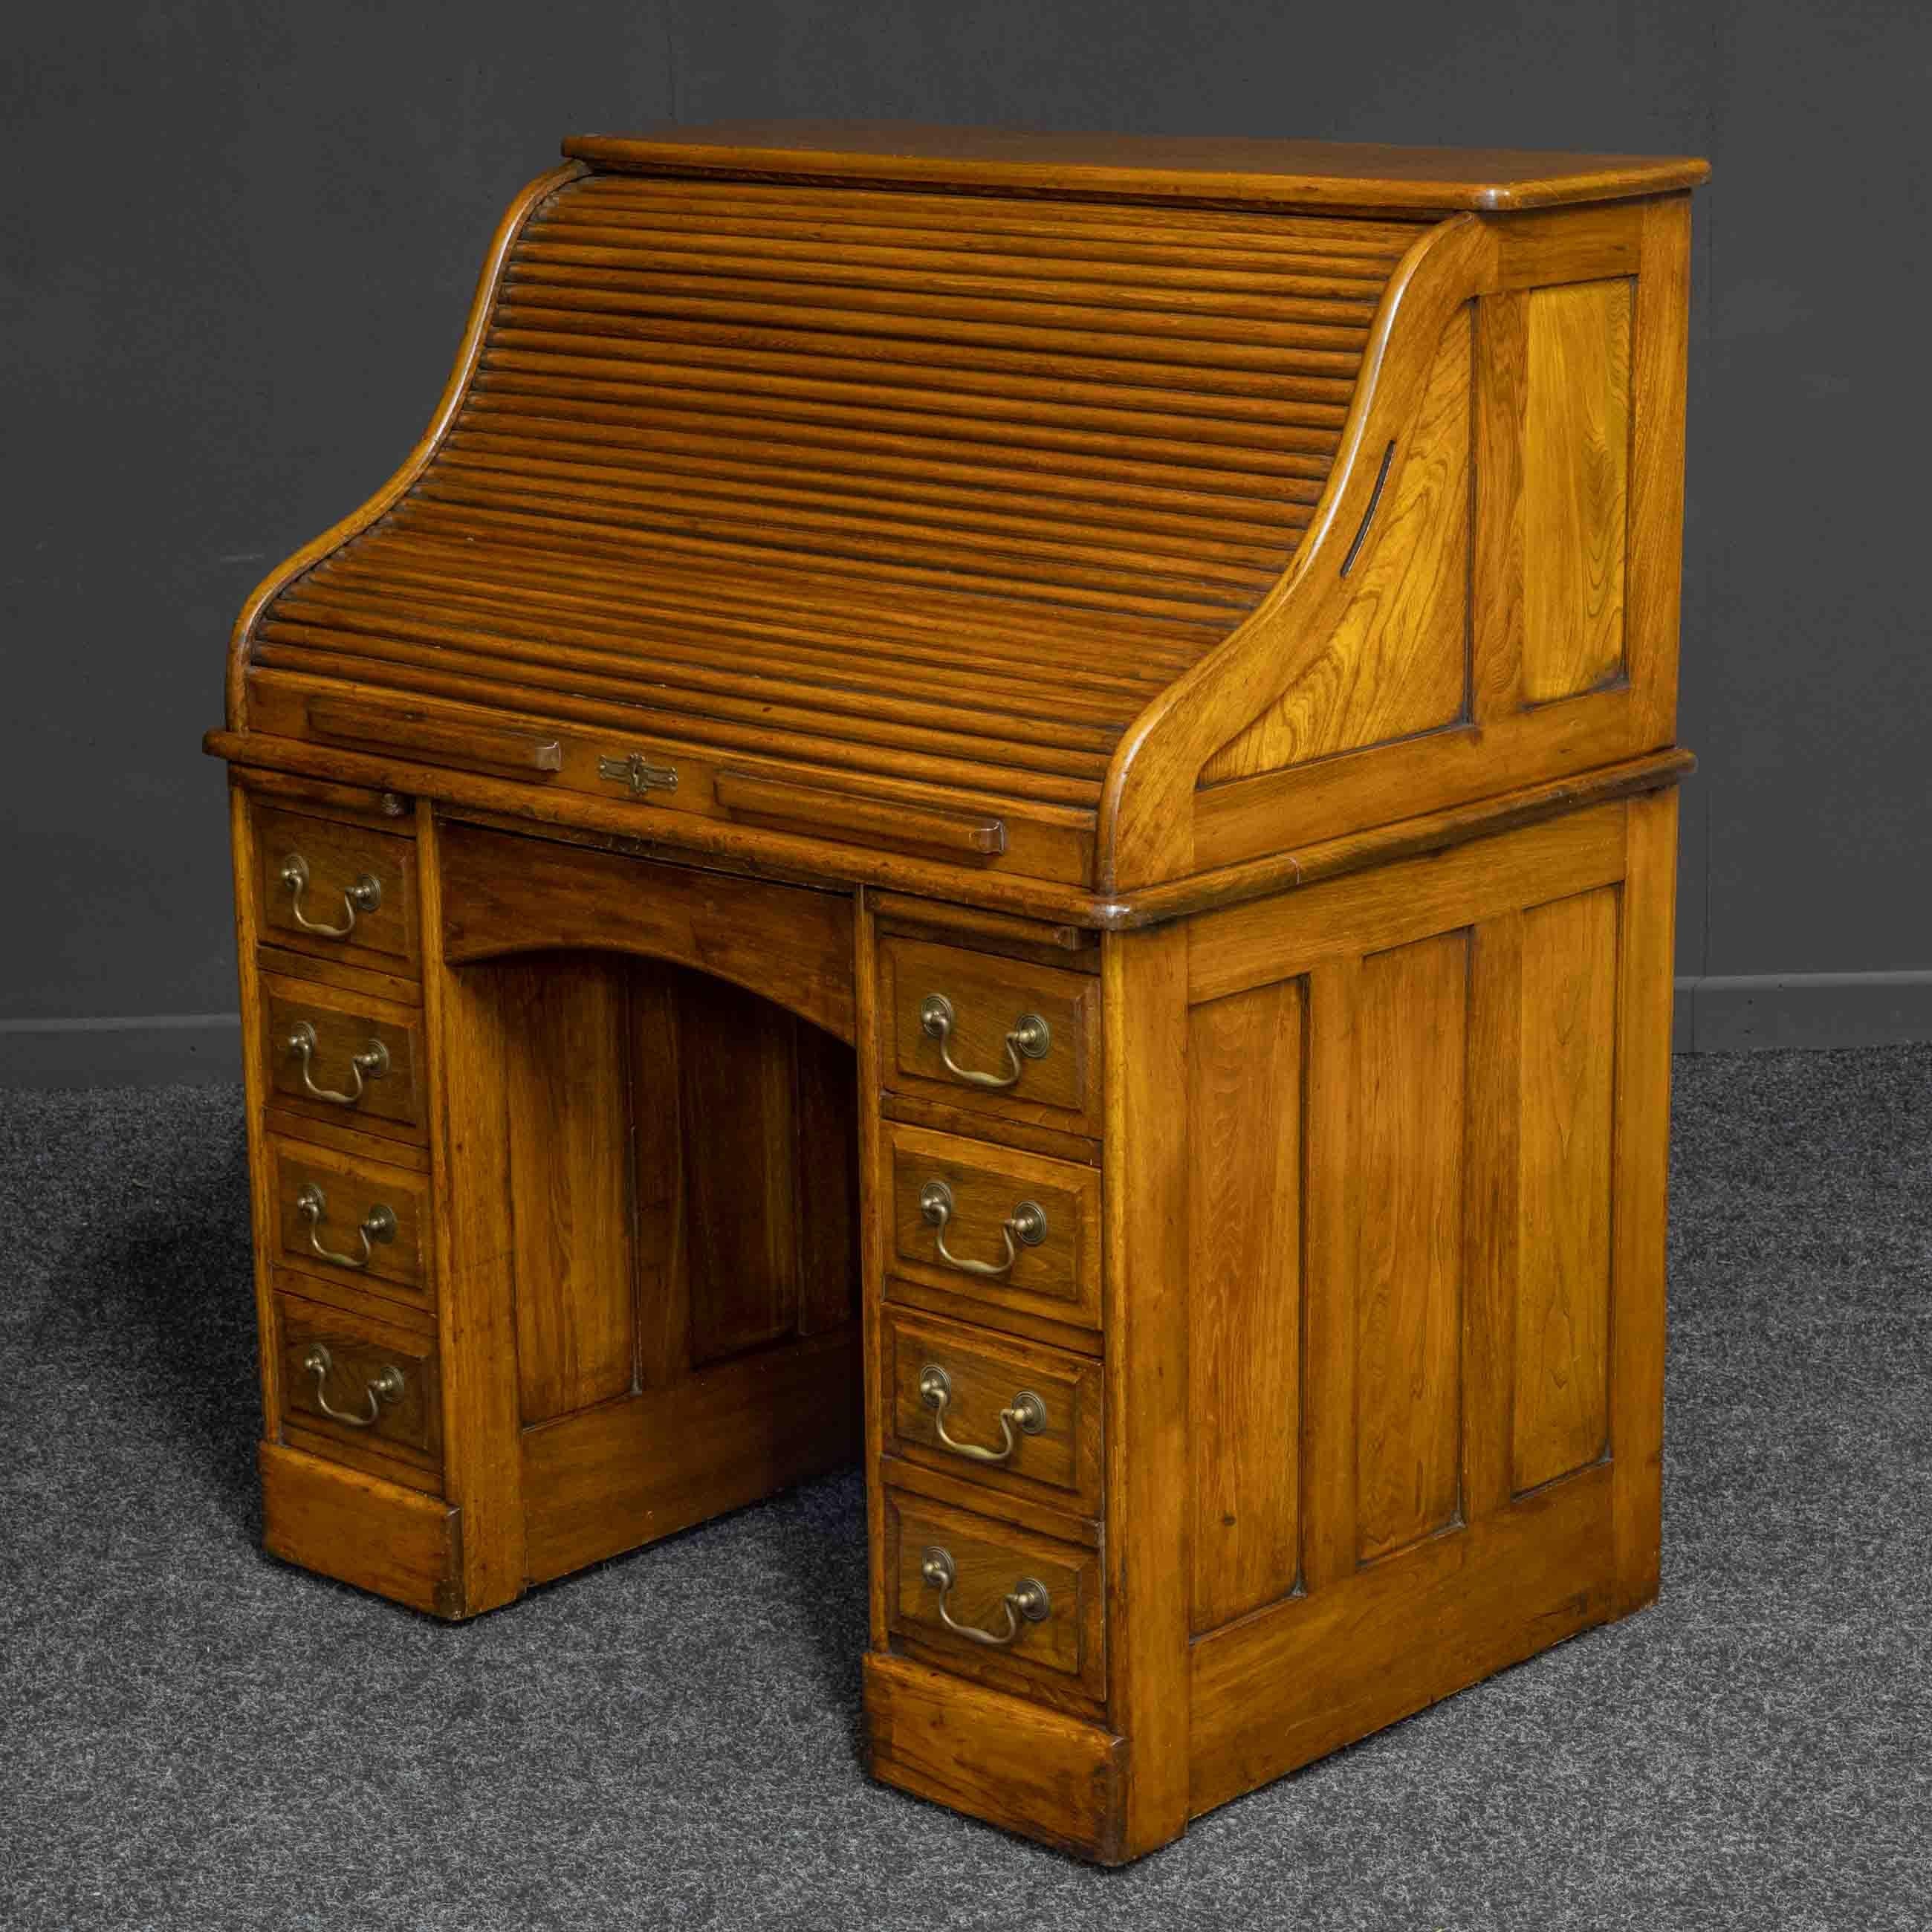 A small and attractive walnut roll top desk with a stamp to the central drawer top - Gillows London. Whilst this is a well made piece we think the attribution to Gillows is suspicious and likely done by a unscrupulous previous seller in the desk's